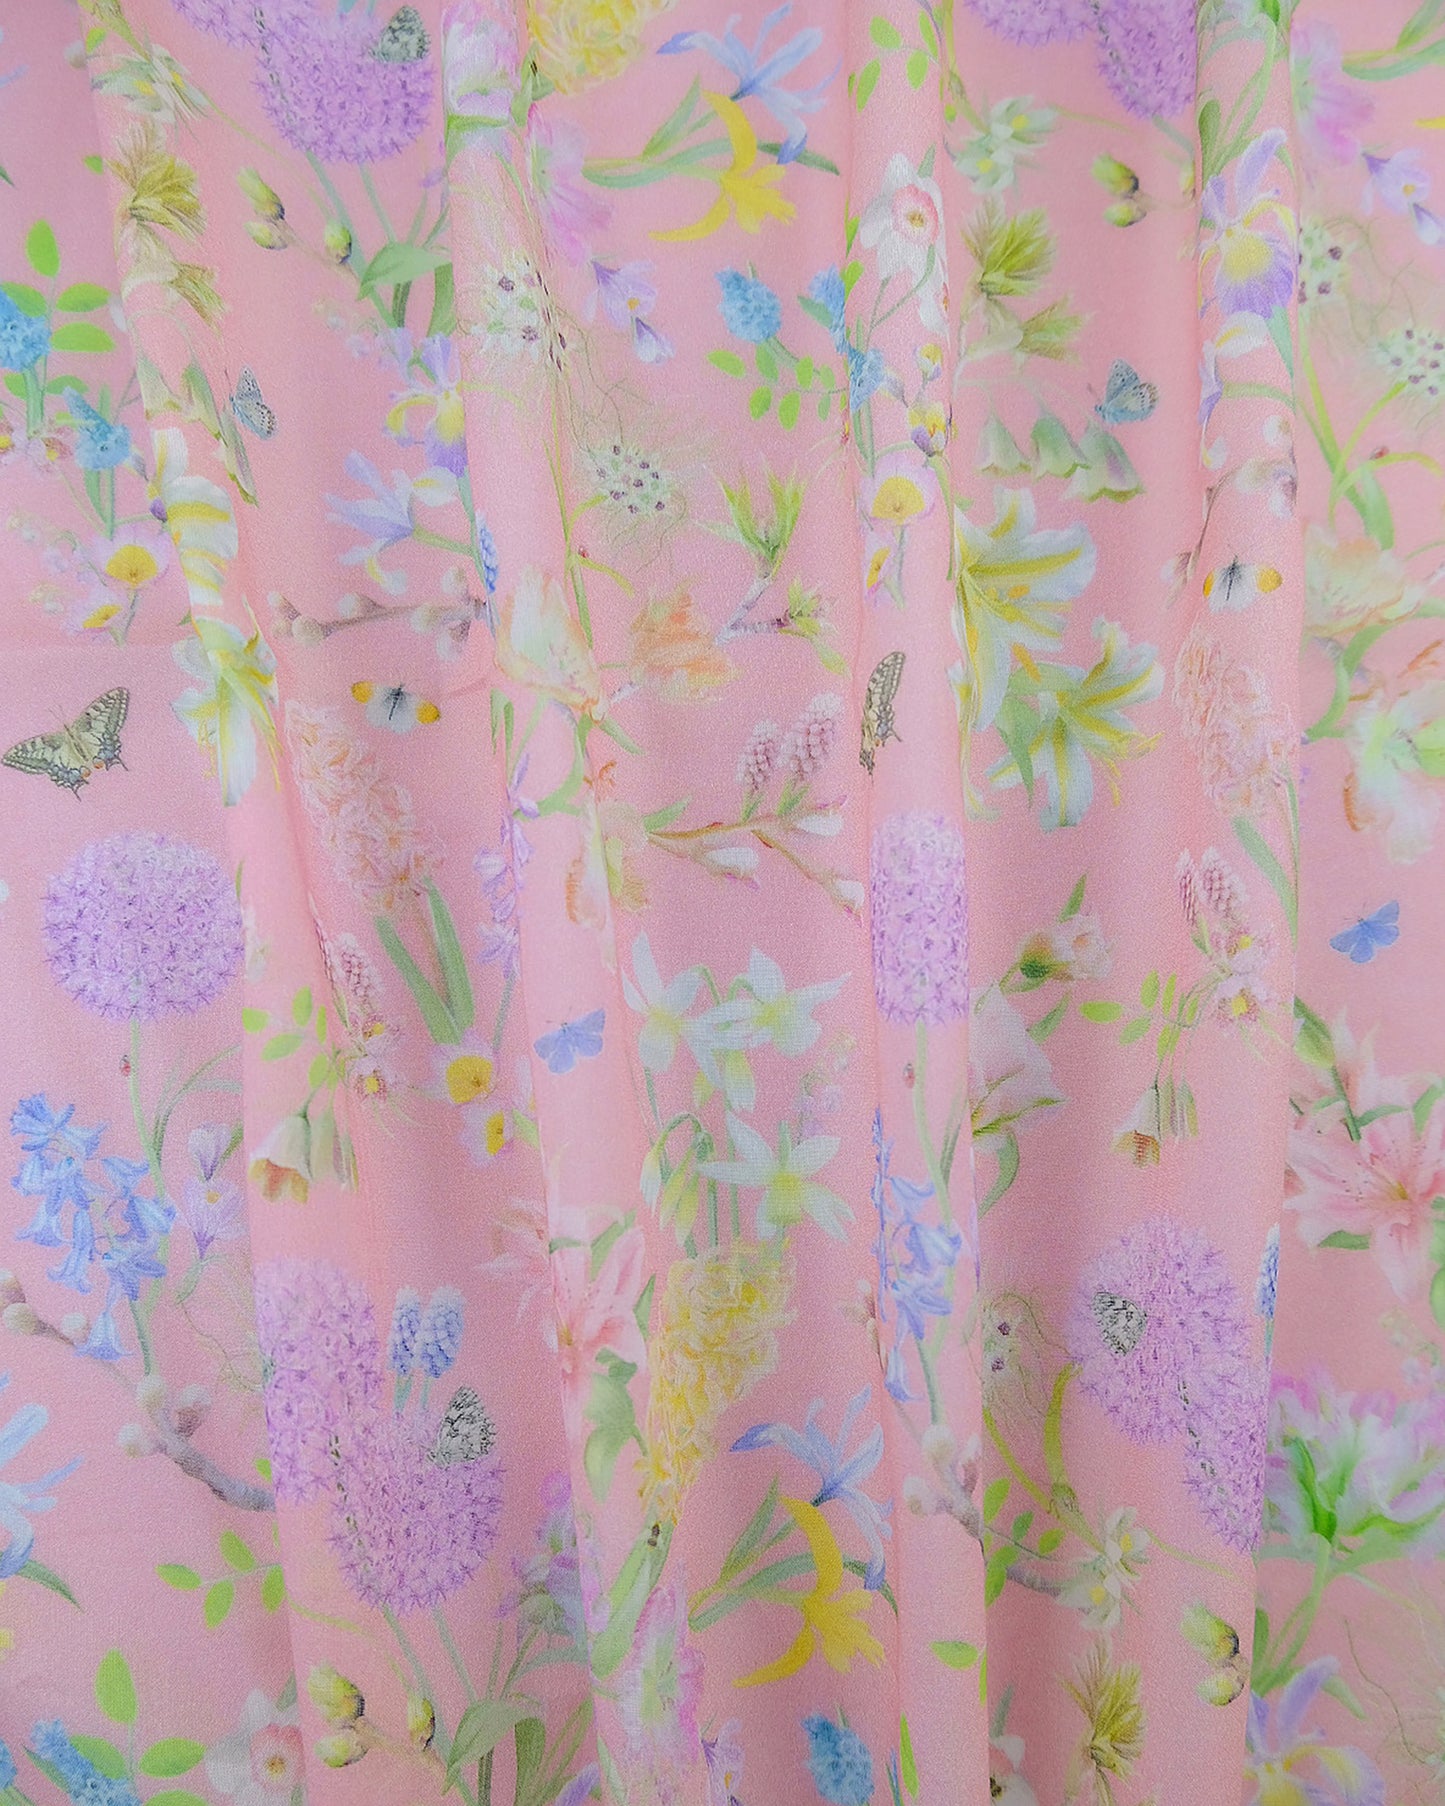 Transparent organic textile in a designer nature inspired baby pink print for window coverings.